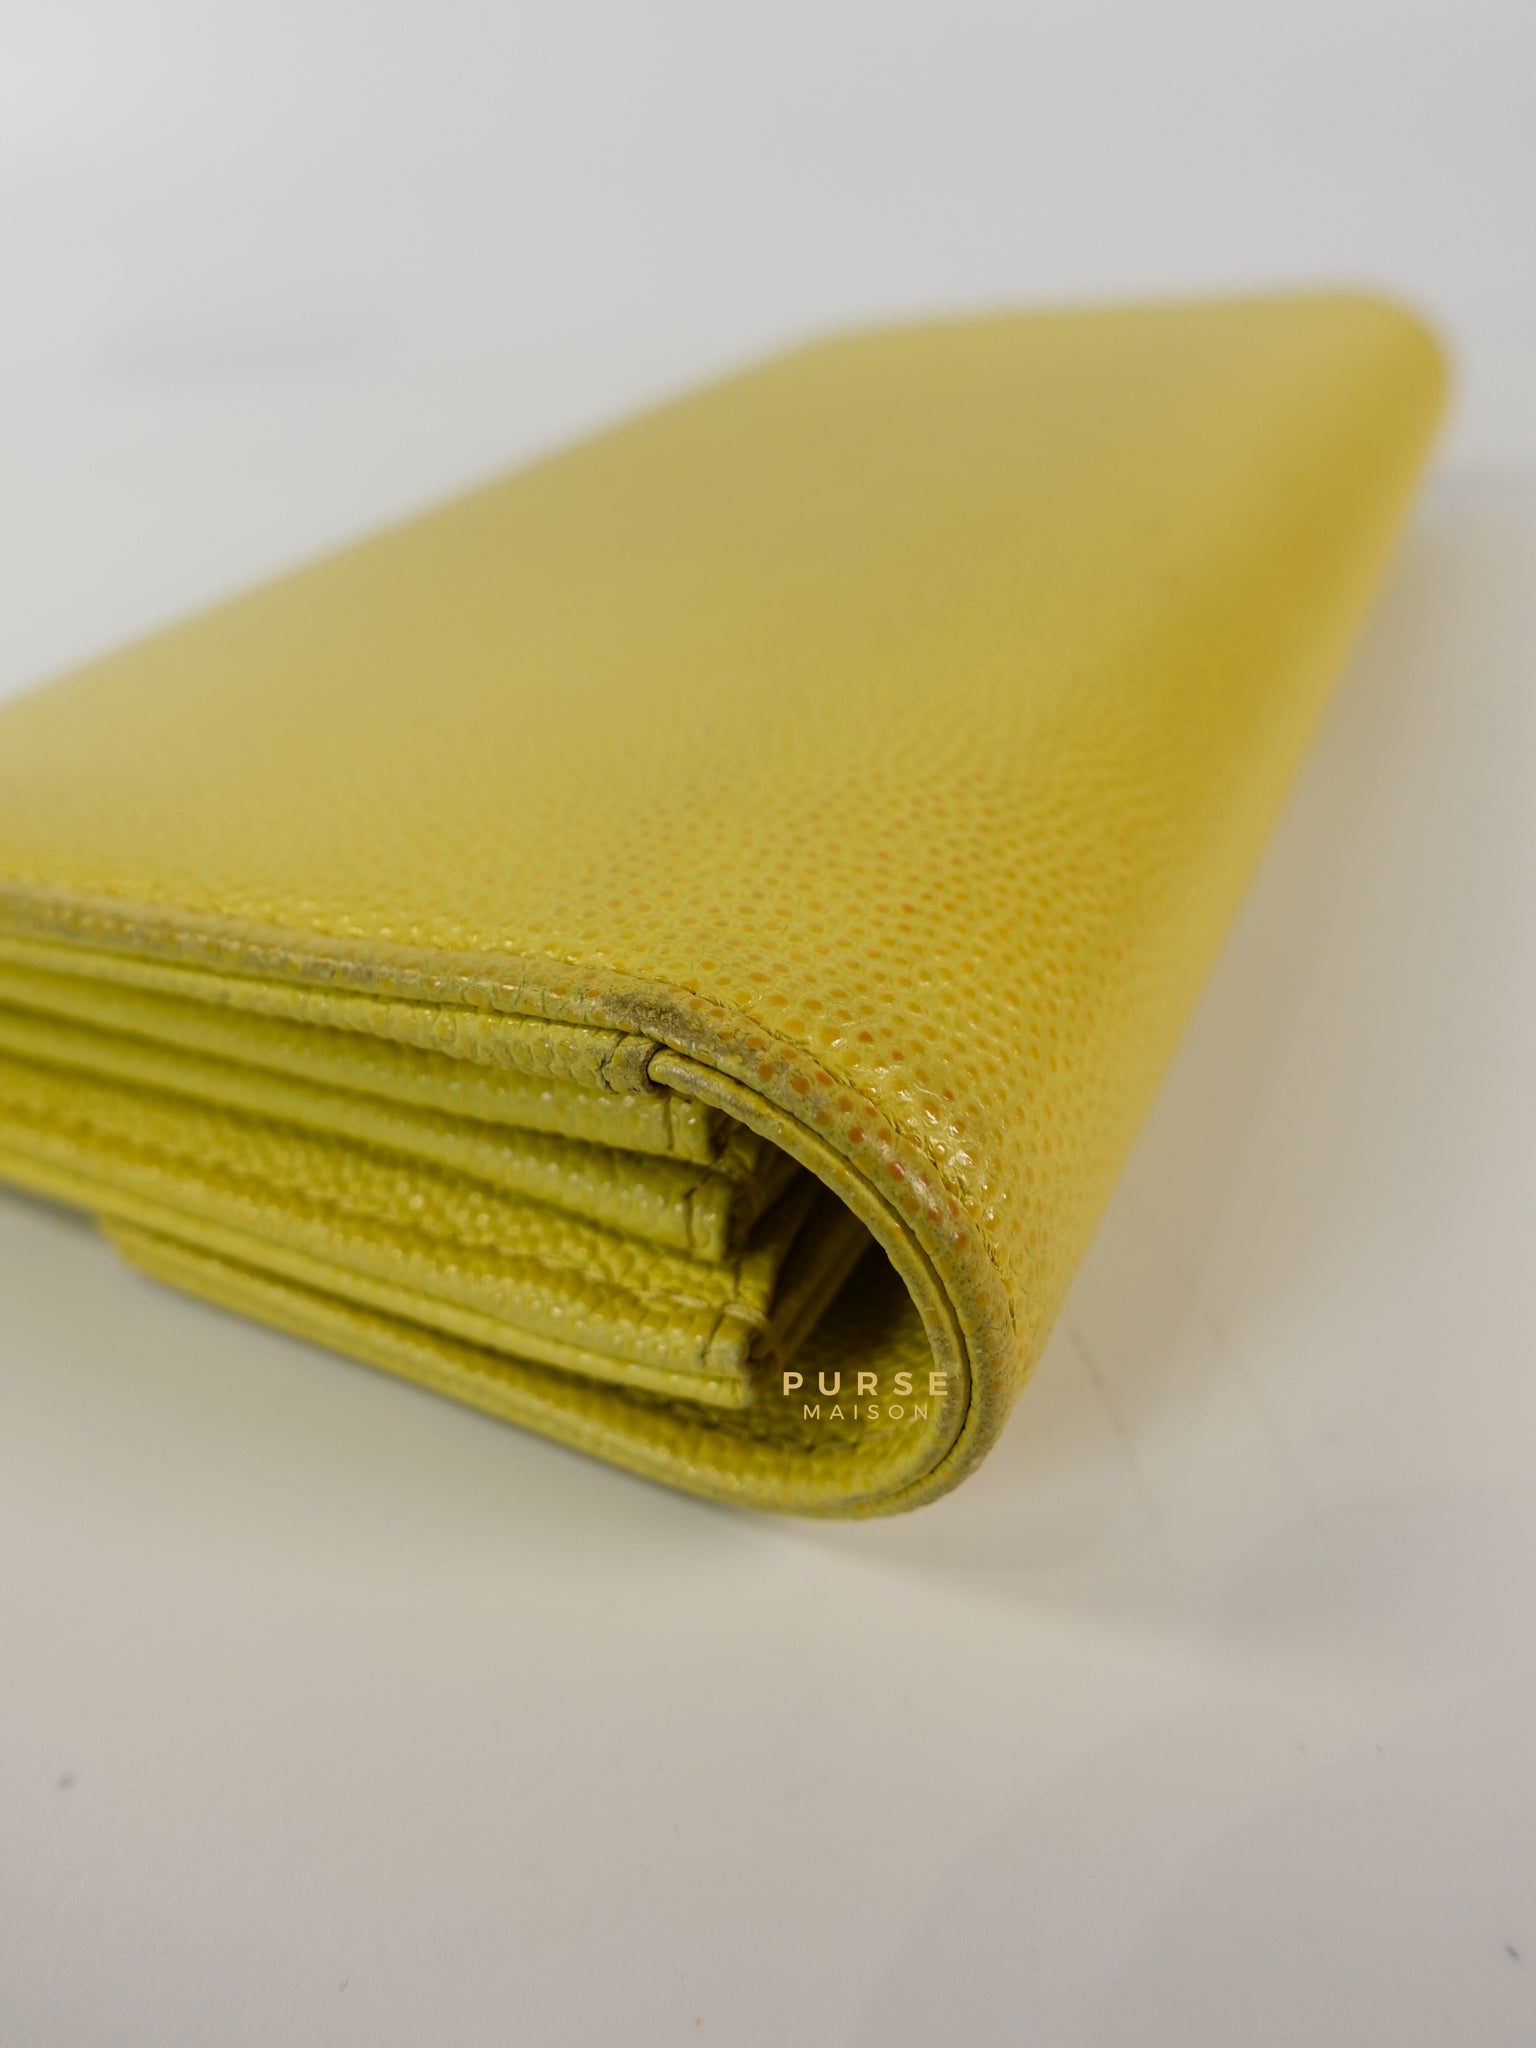 Coco Mark Long Wallet in Light Yellow Caviar Leather Series 24 | Purse Maison Luxury Bags Shop